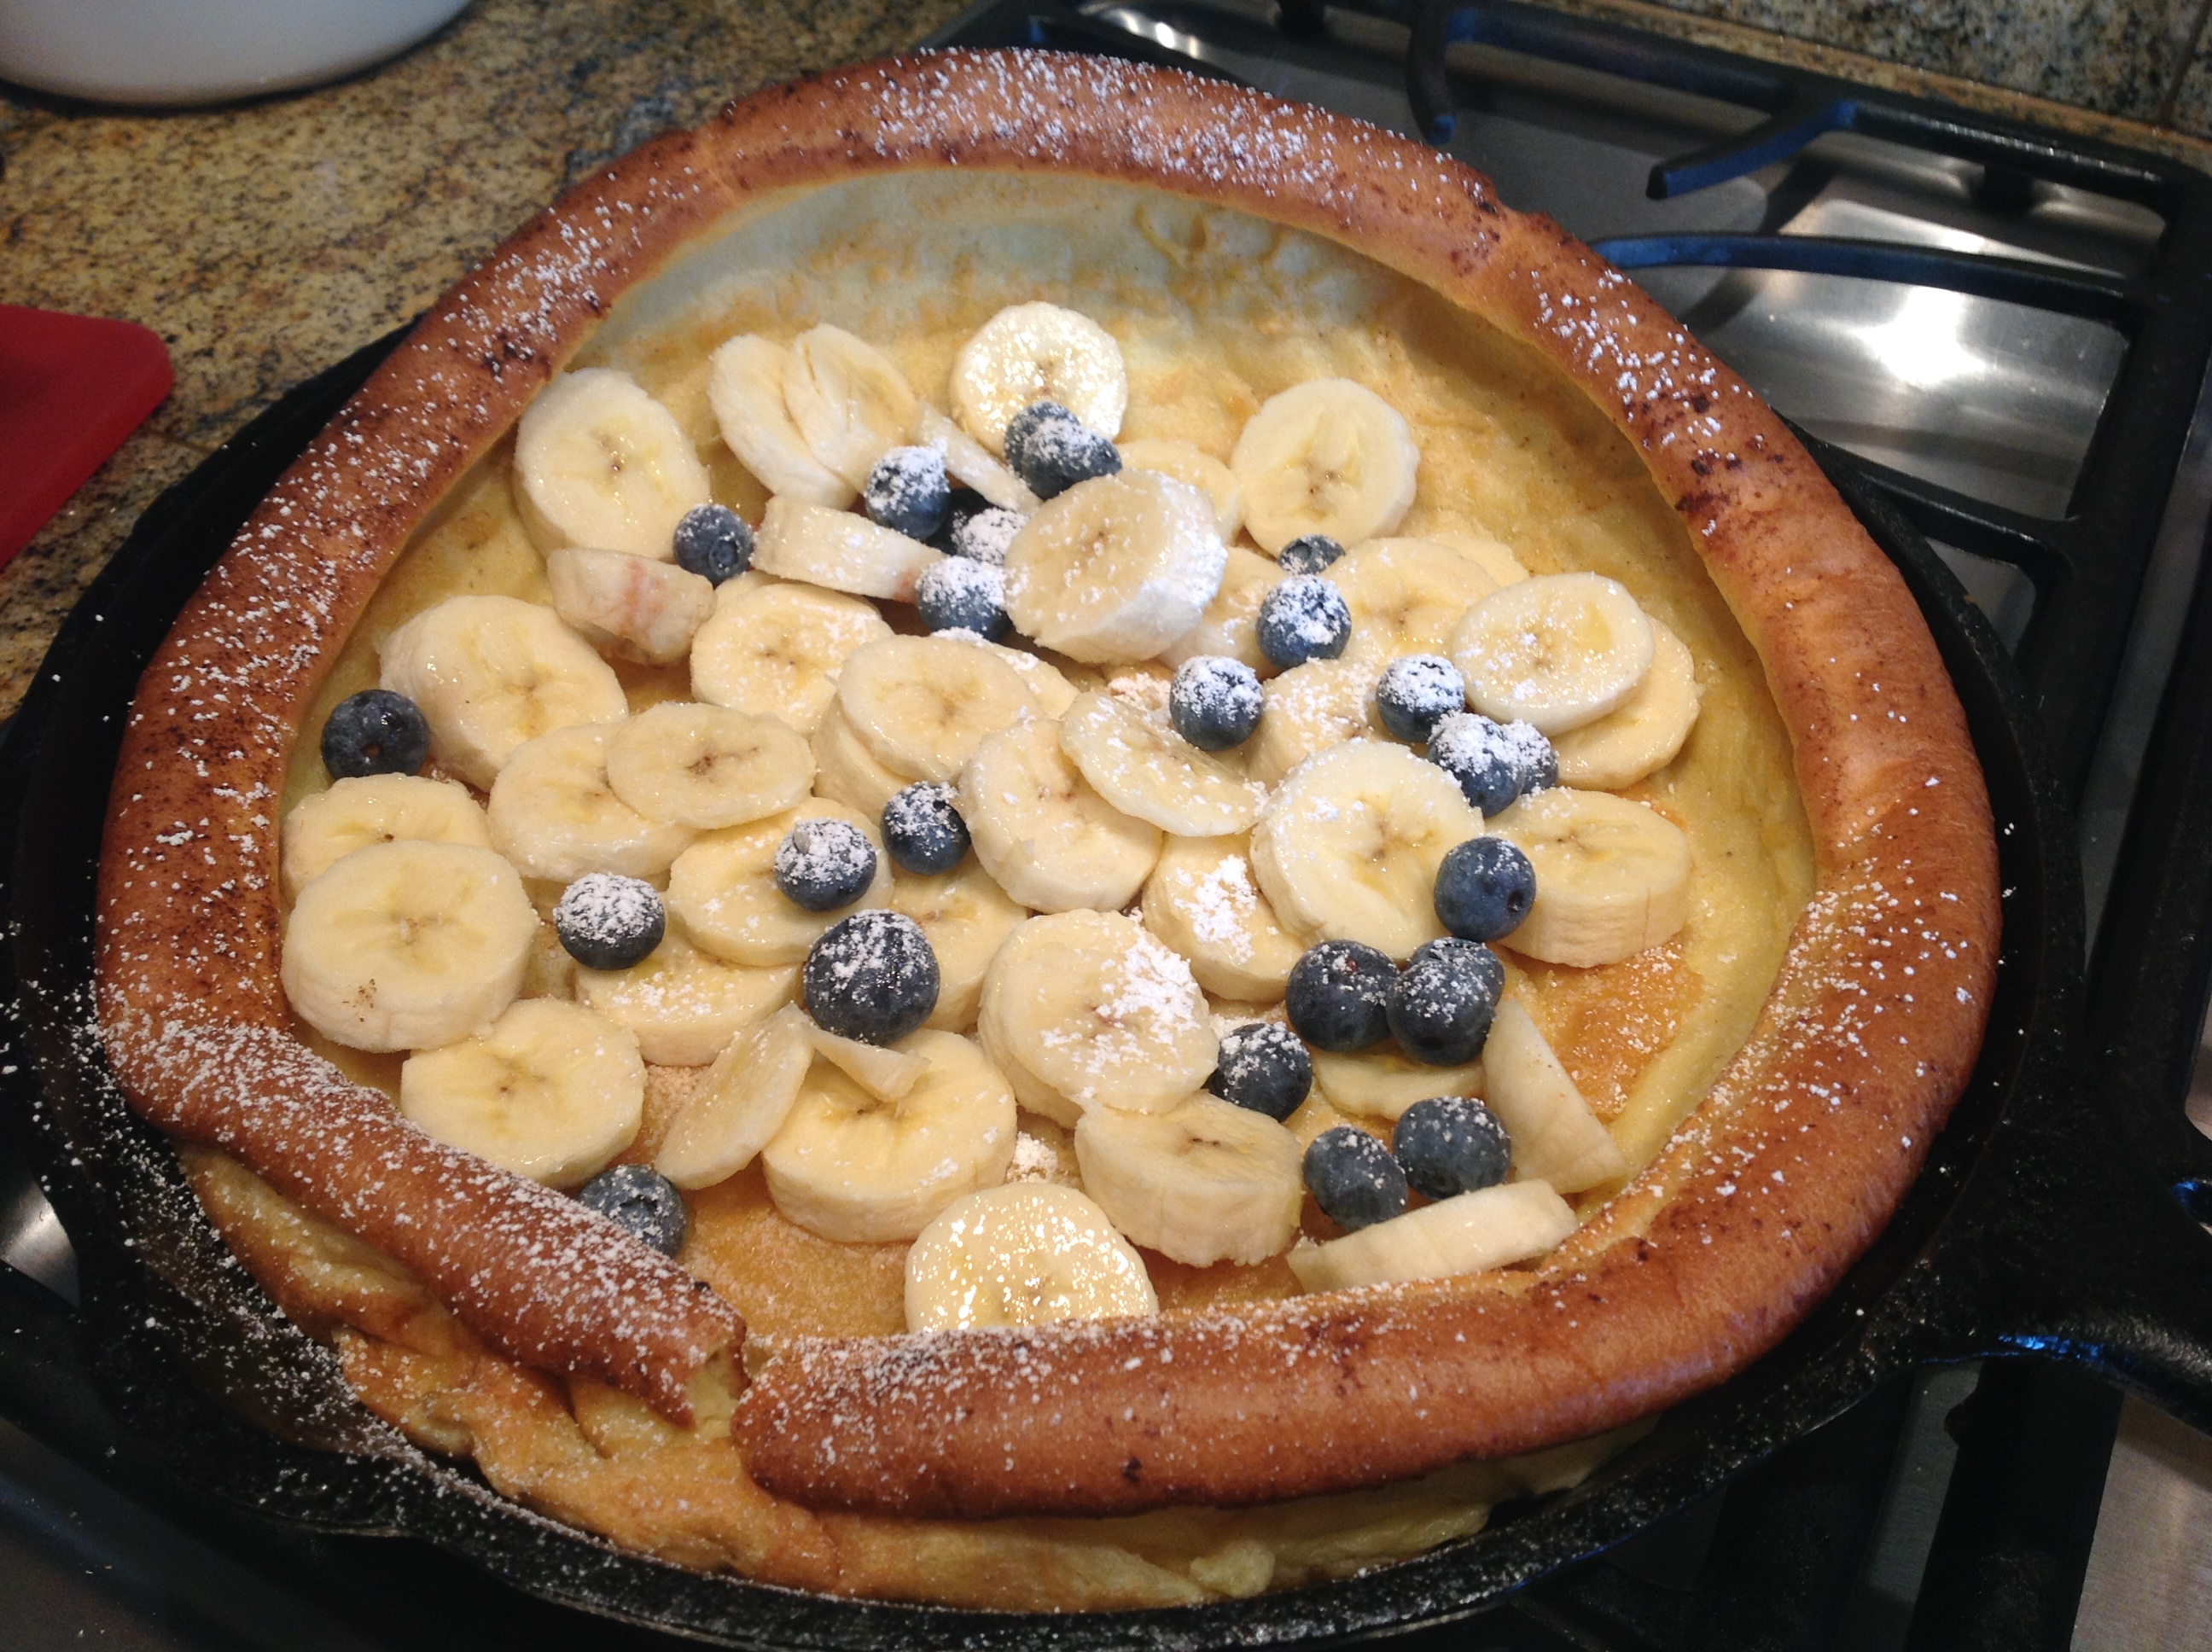 Souffle Pancake with banana and blueberries